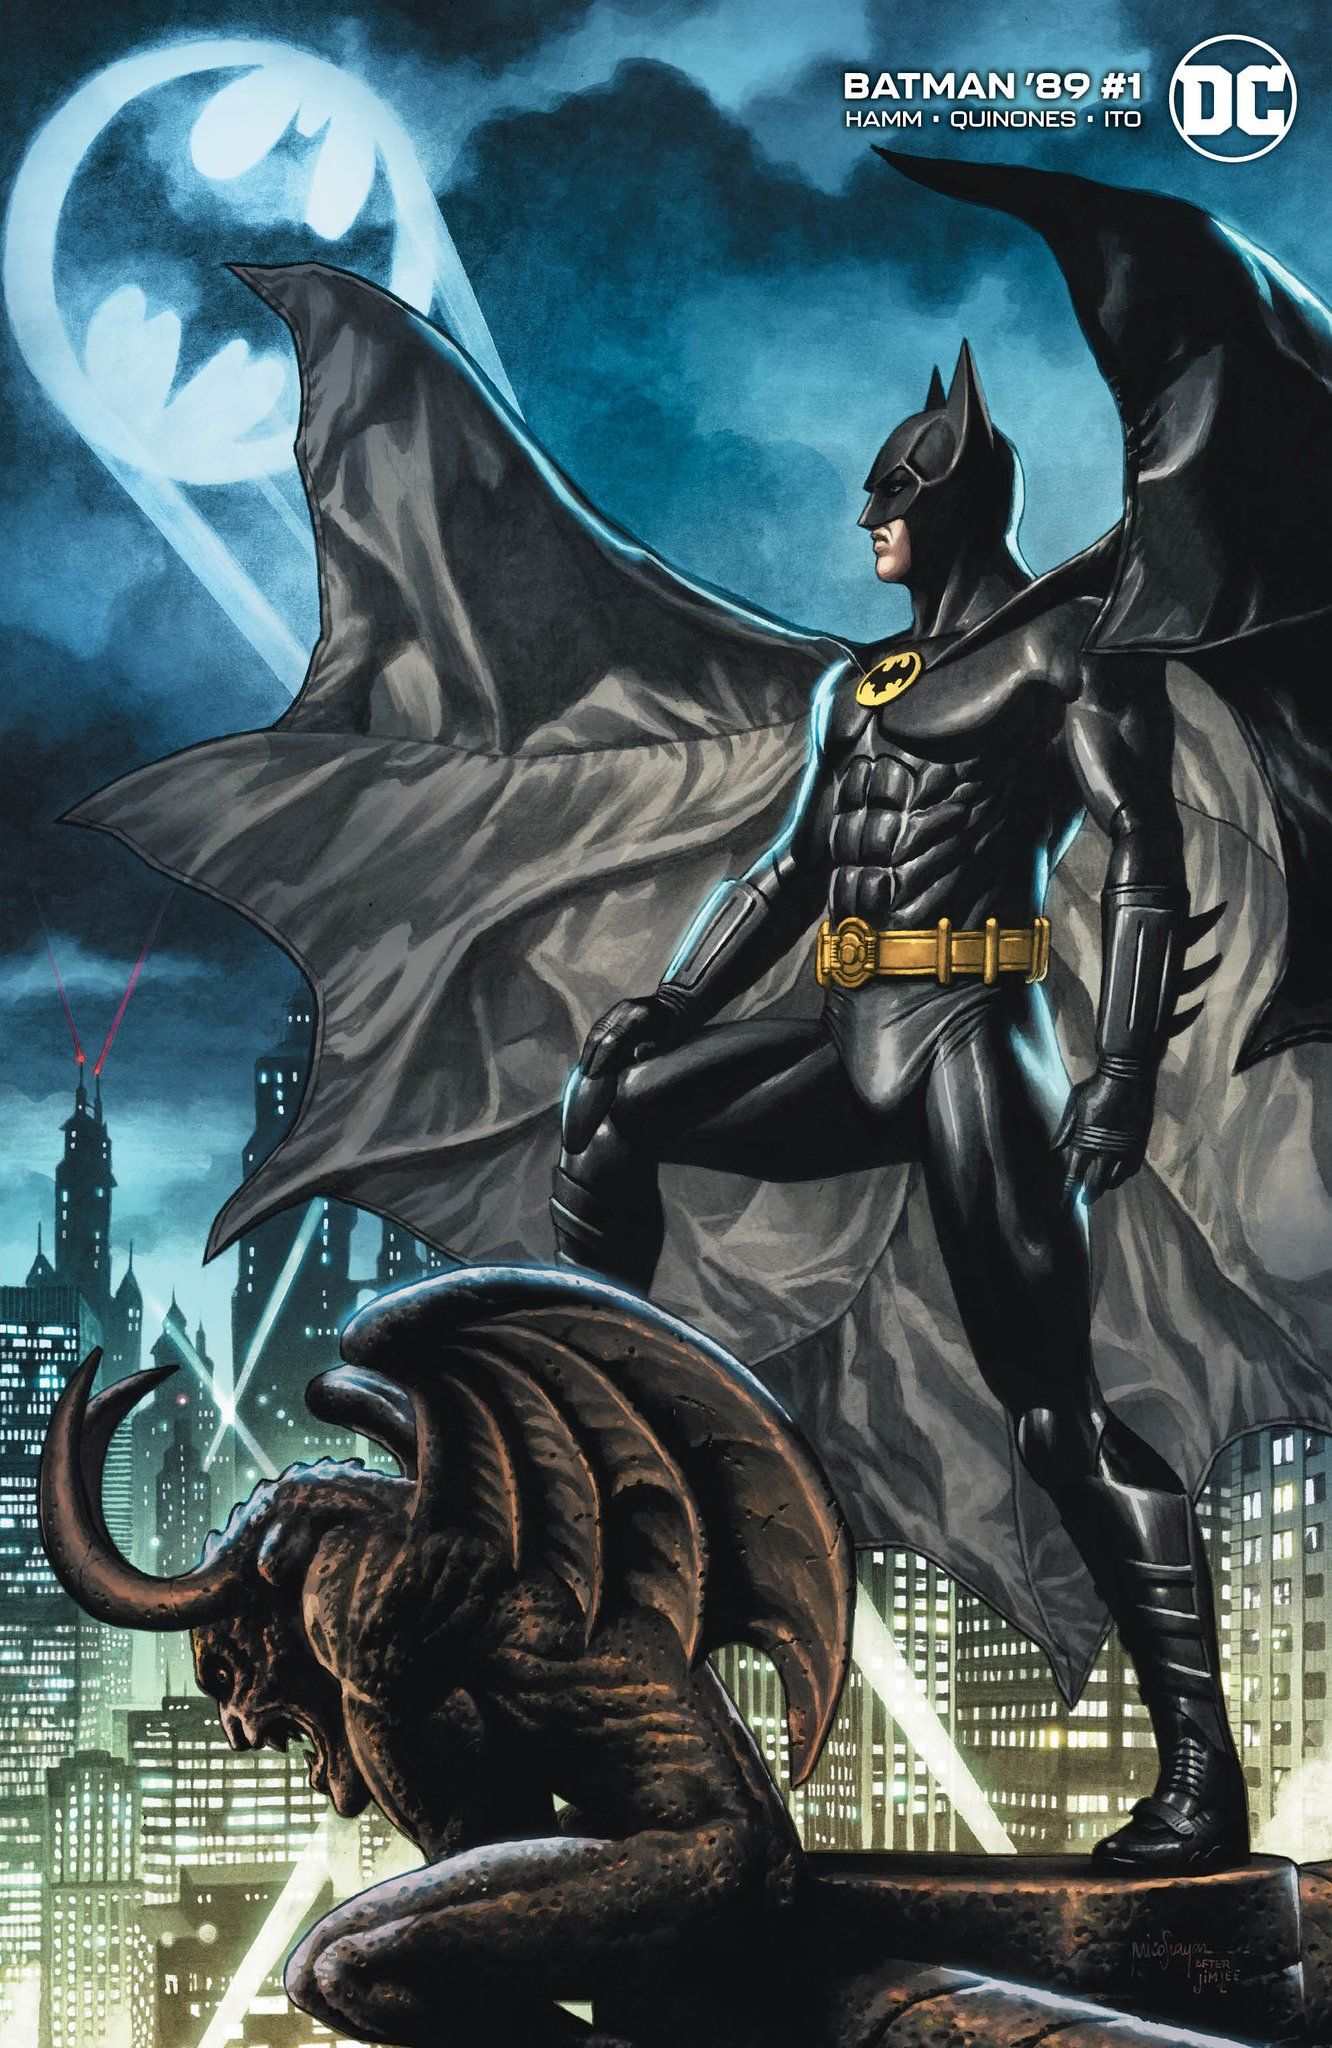 Mico Suayan's Big Time Collectibles-exclusivecover for Batman '89, without trade dress.